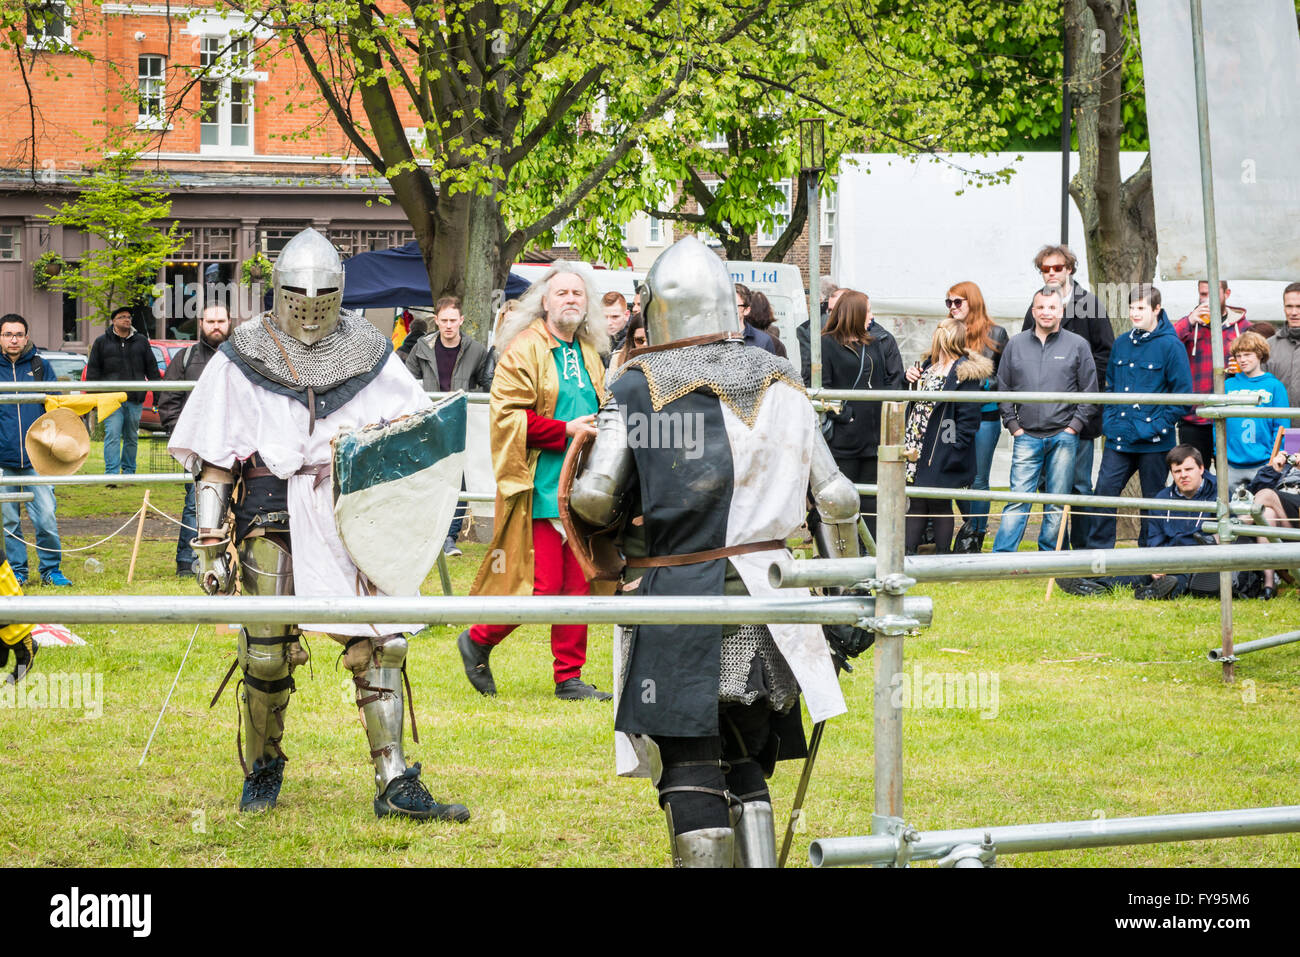 London, UK. 23rd April, 2016. St Georges day celebration at Vauxhall Pleasure Gardens. Battle of Nations staging medieval-style combat. Knights are fighting Credit:  Elena Chaykina/Alamy Live News Stock Photo